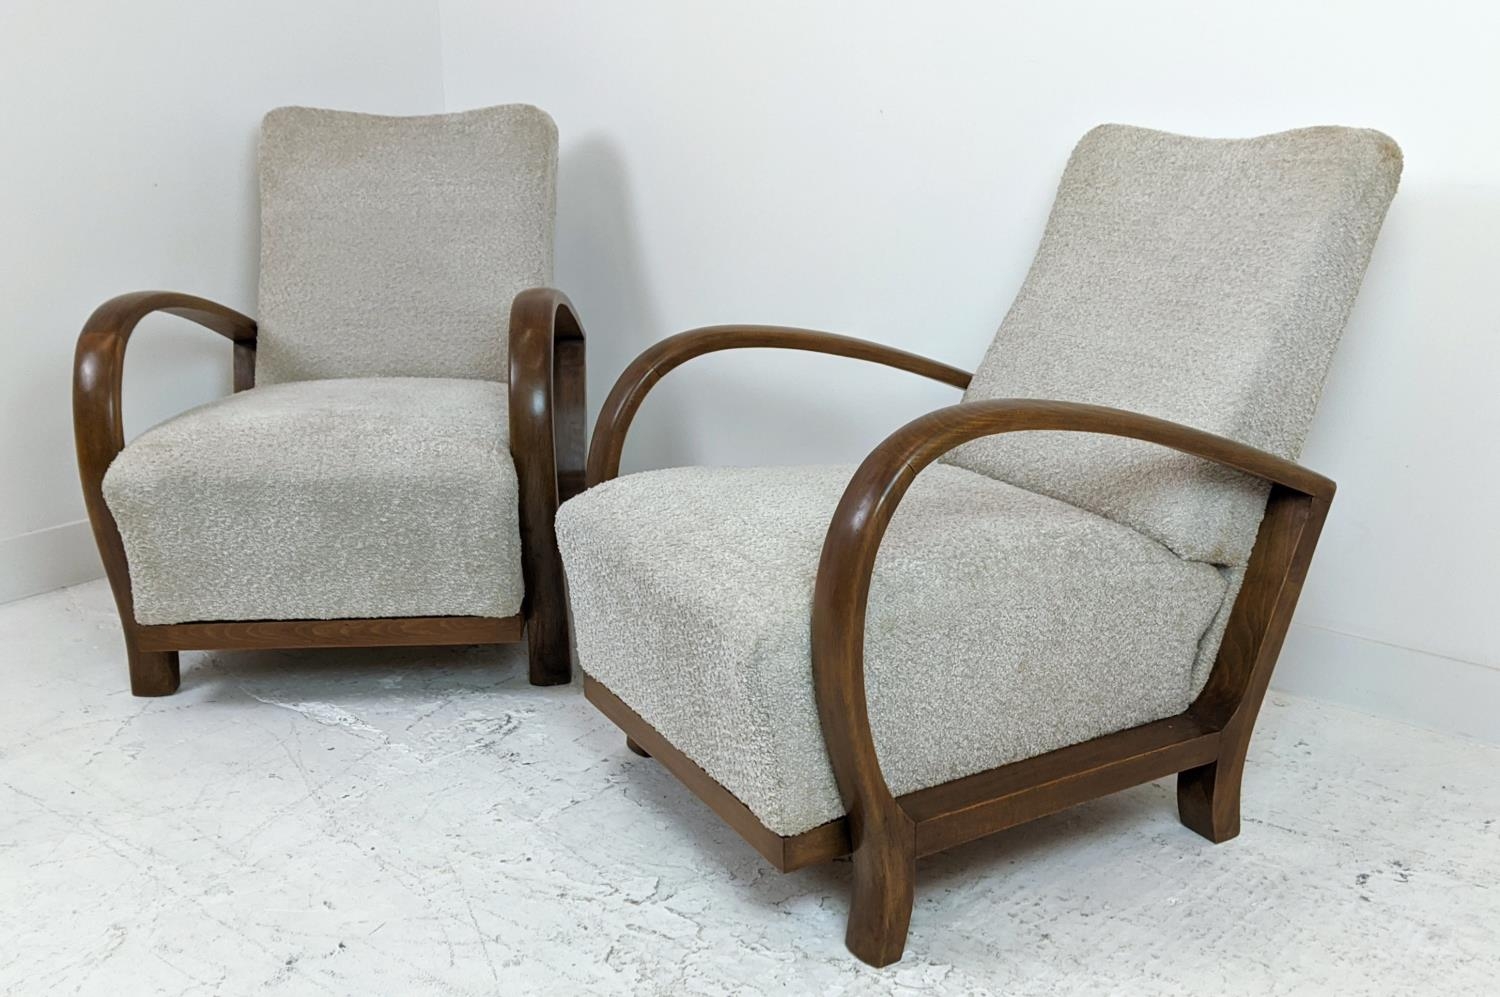 HALABALA ARMCHAIRS, a pair, mid 20th century beechwood and boucle wool upholstered, 89cm H x 66cm - Image 4 of 8